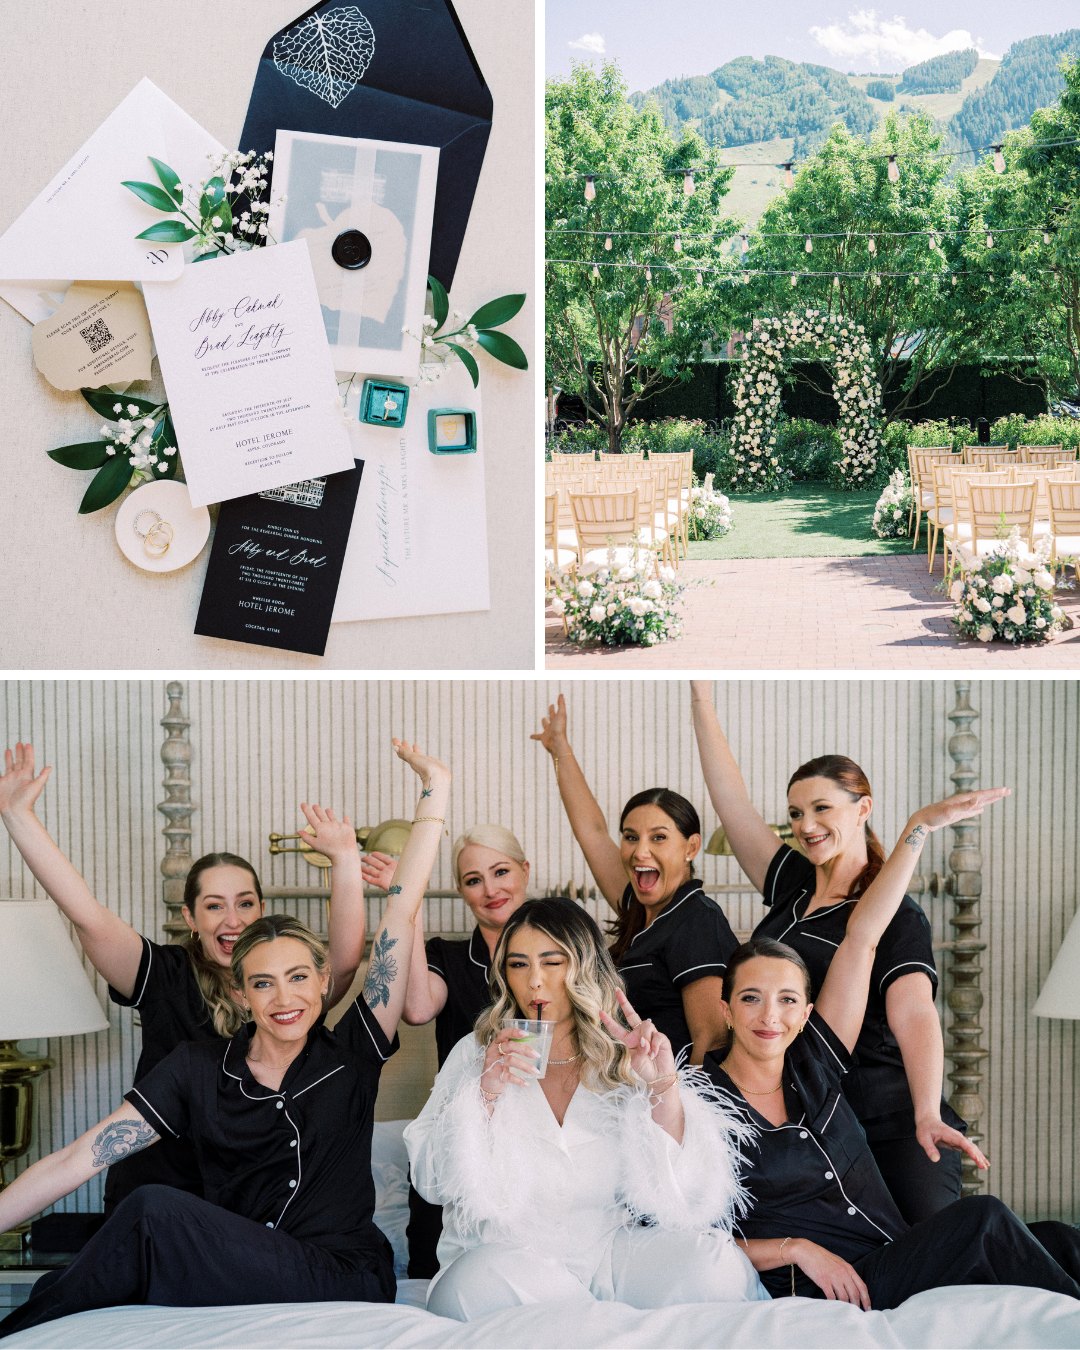 blue and black stationery suite, ceremony set up with white floral arch, bride in white robe with bridesmaids sitting on bed behind her in black robes